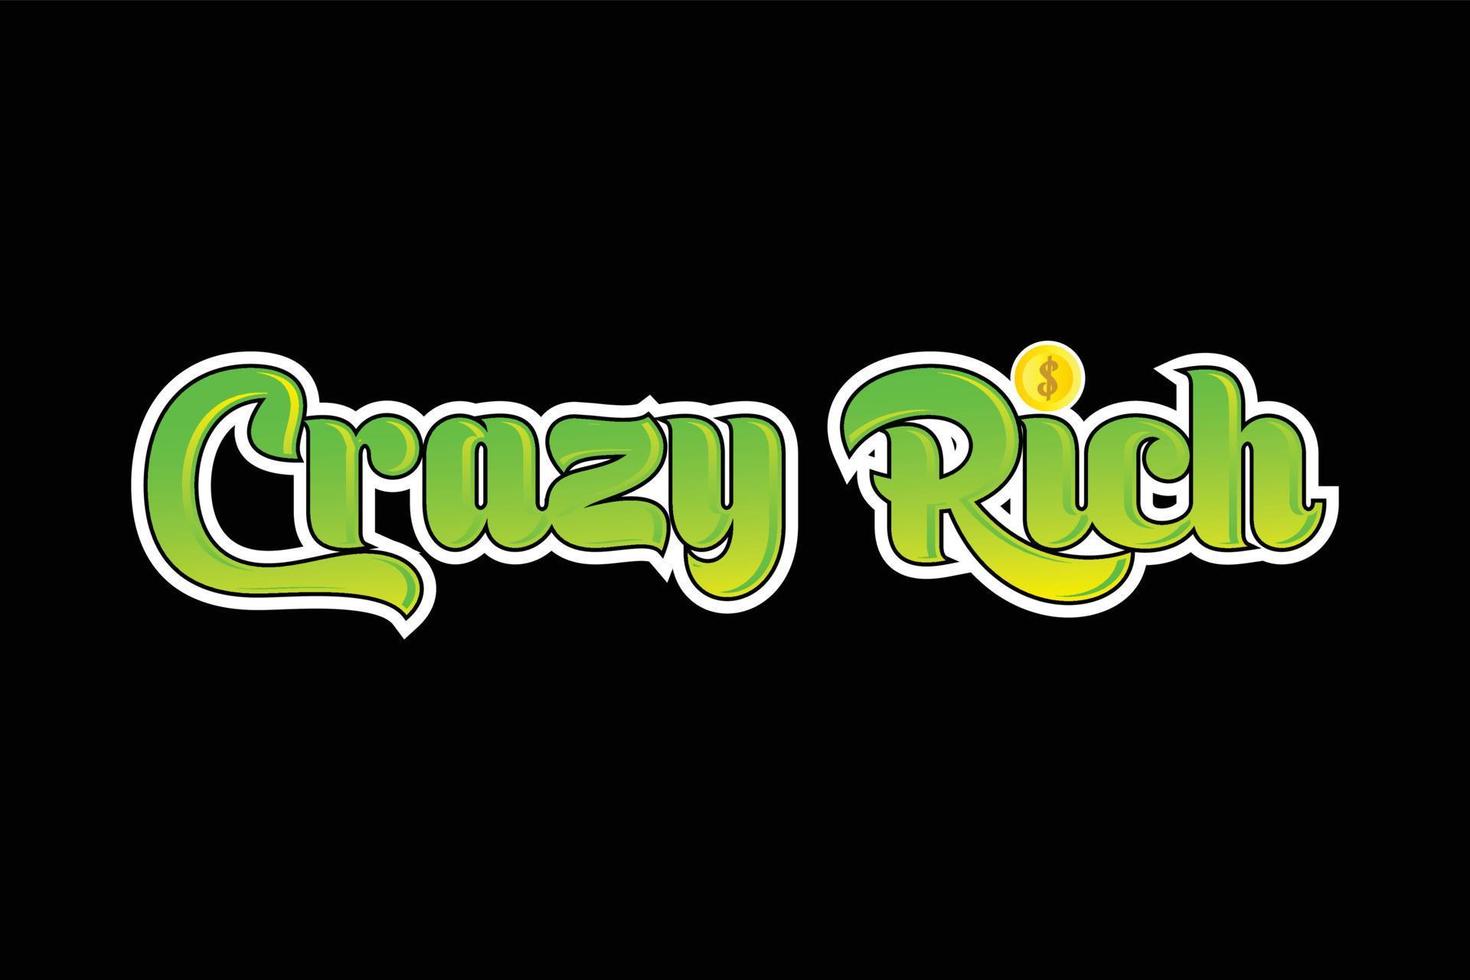 crazy rich vector t-shirt design is great for screen printing t-shirts, sweaters, hats etc